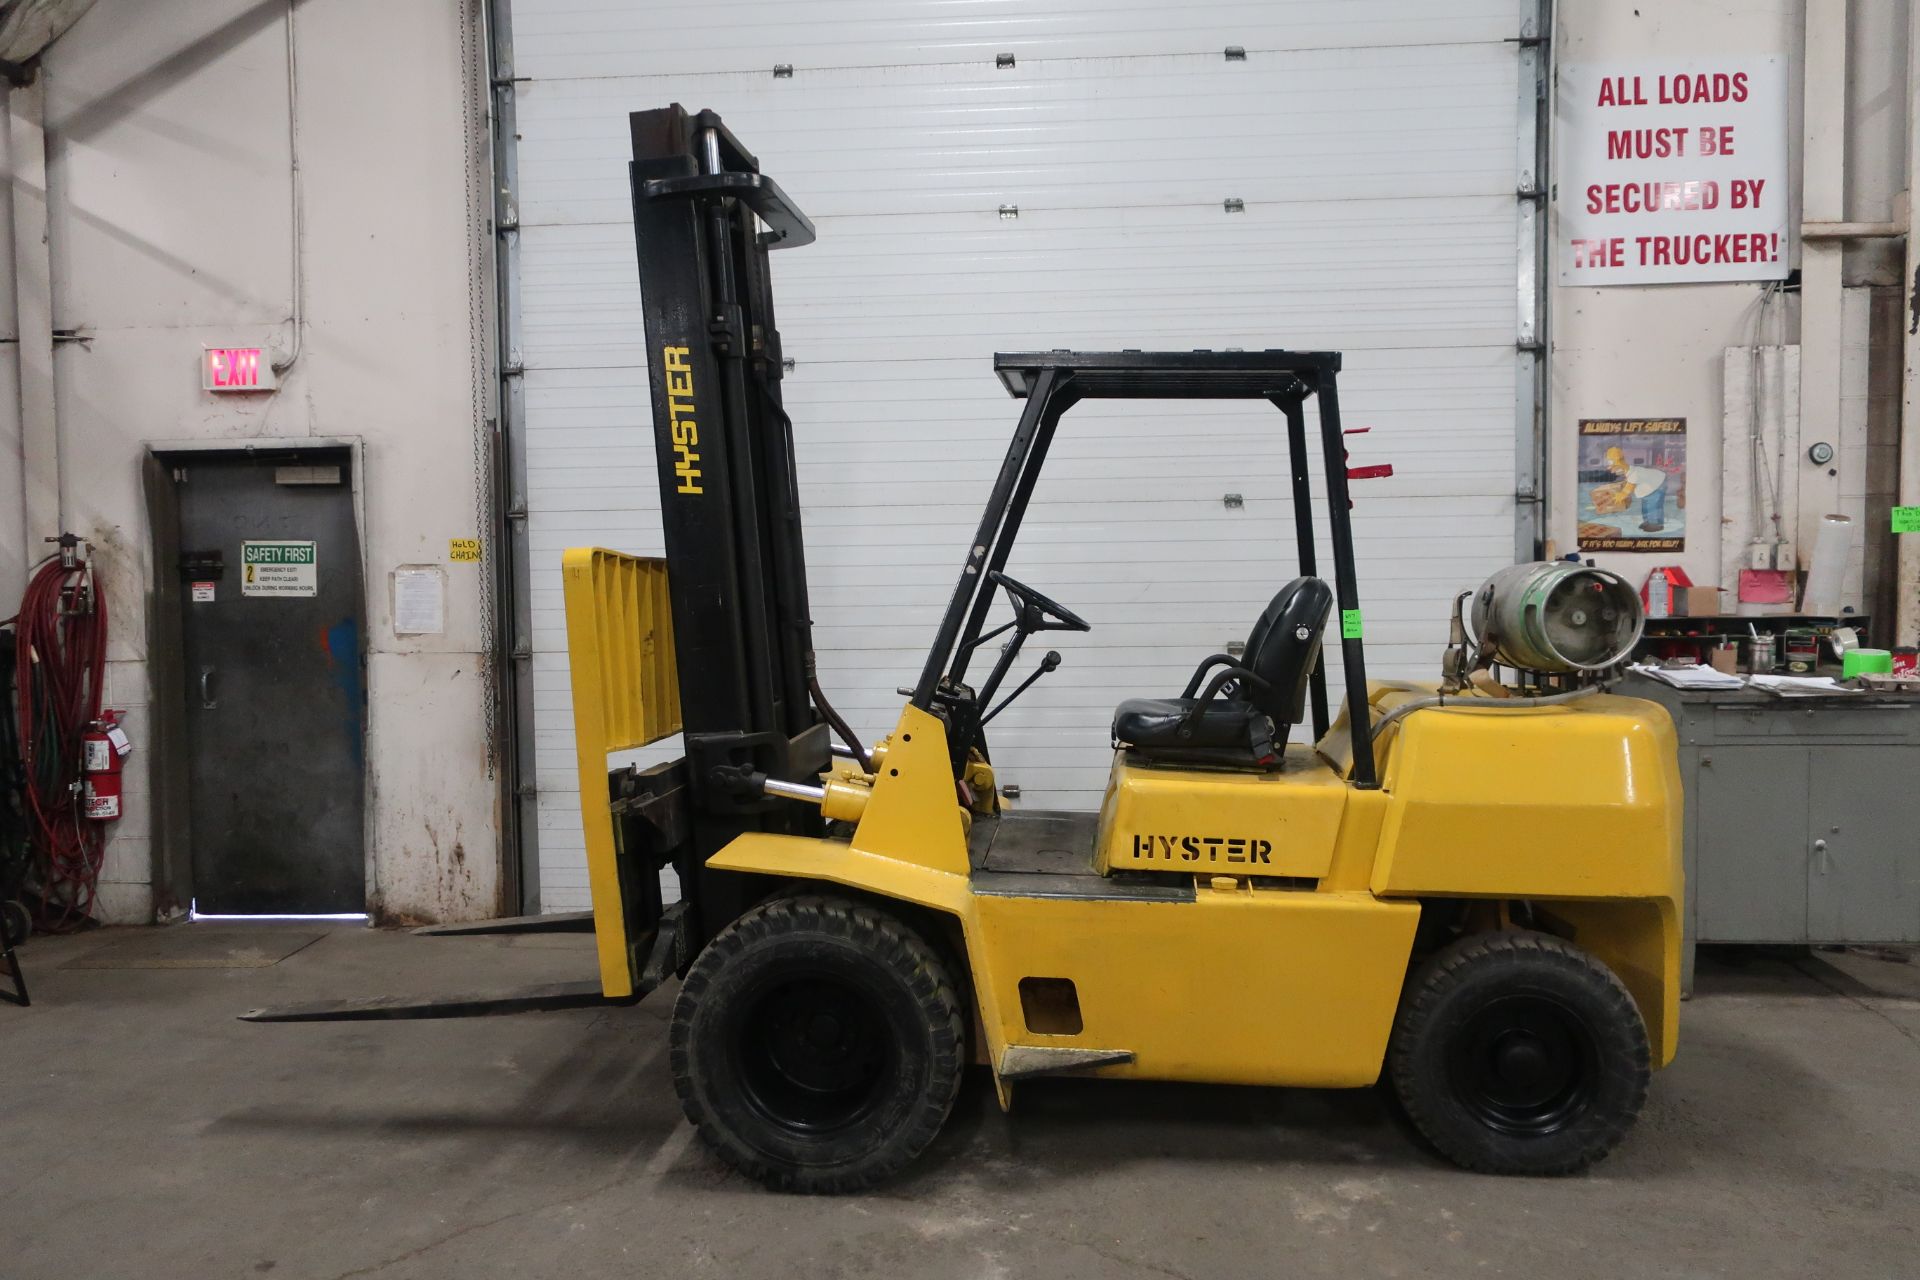 FREE CUSTOMS - Hyster 8000lbs Capacity Forklift with sideshift - LPG (propane) unit (no propane